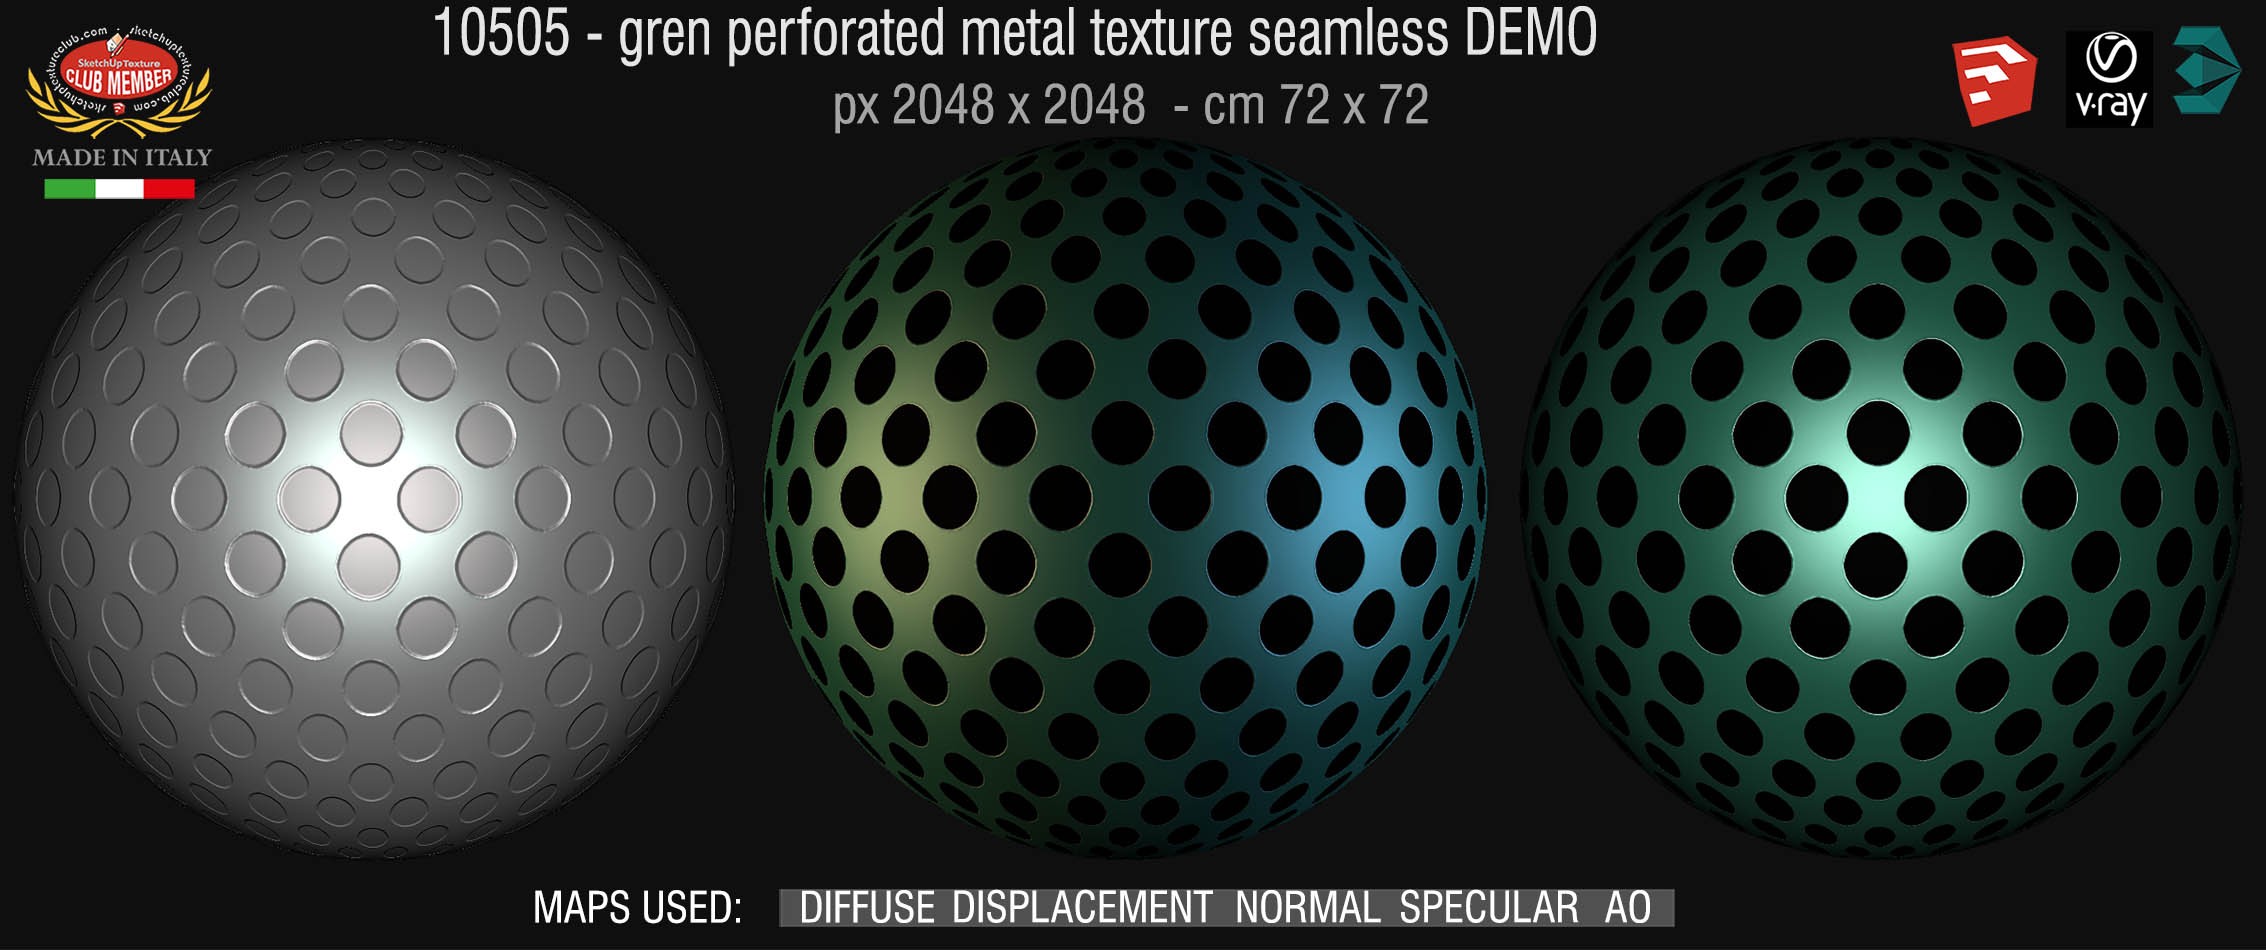 10506 HR Green perforated metal texture seamless + maps DEMO